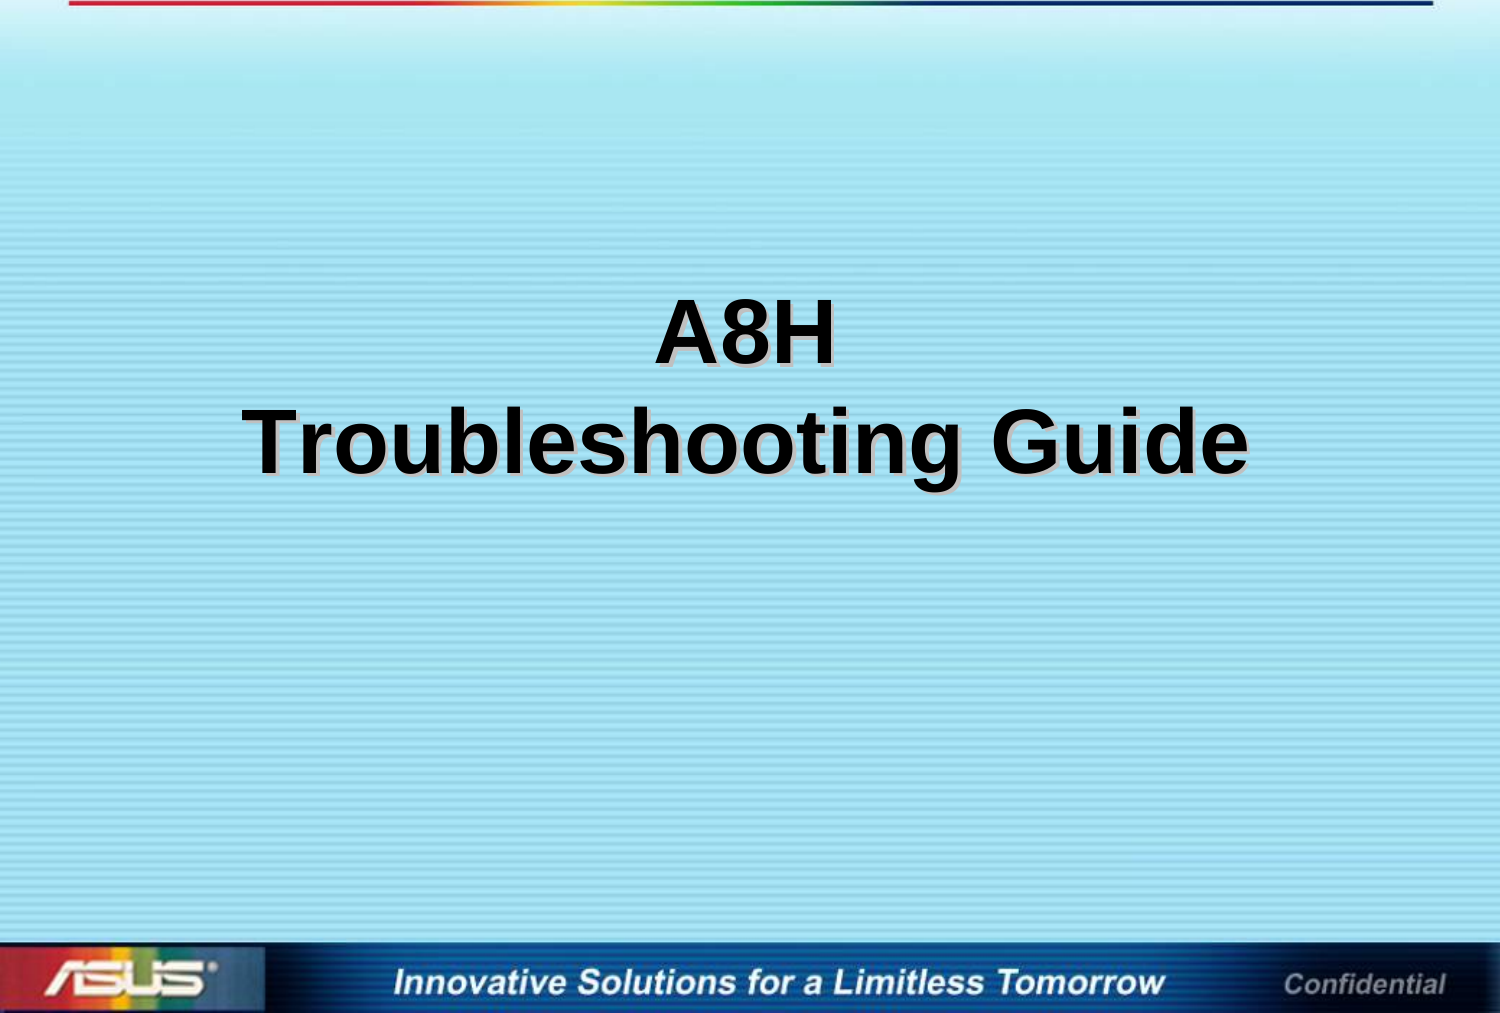 Page 1 of 8 - M9J Troubleshooting Guide A8H